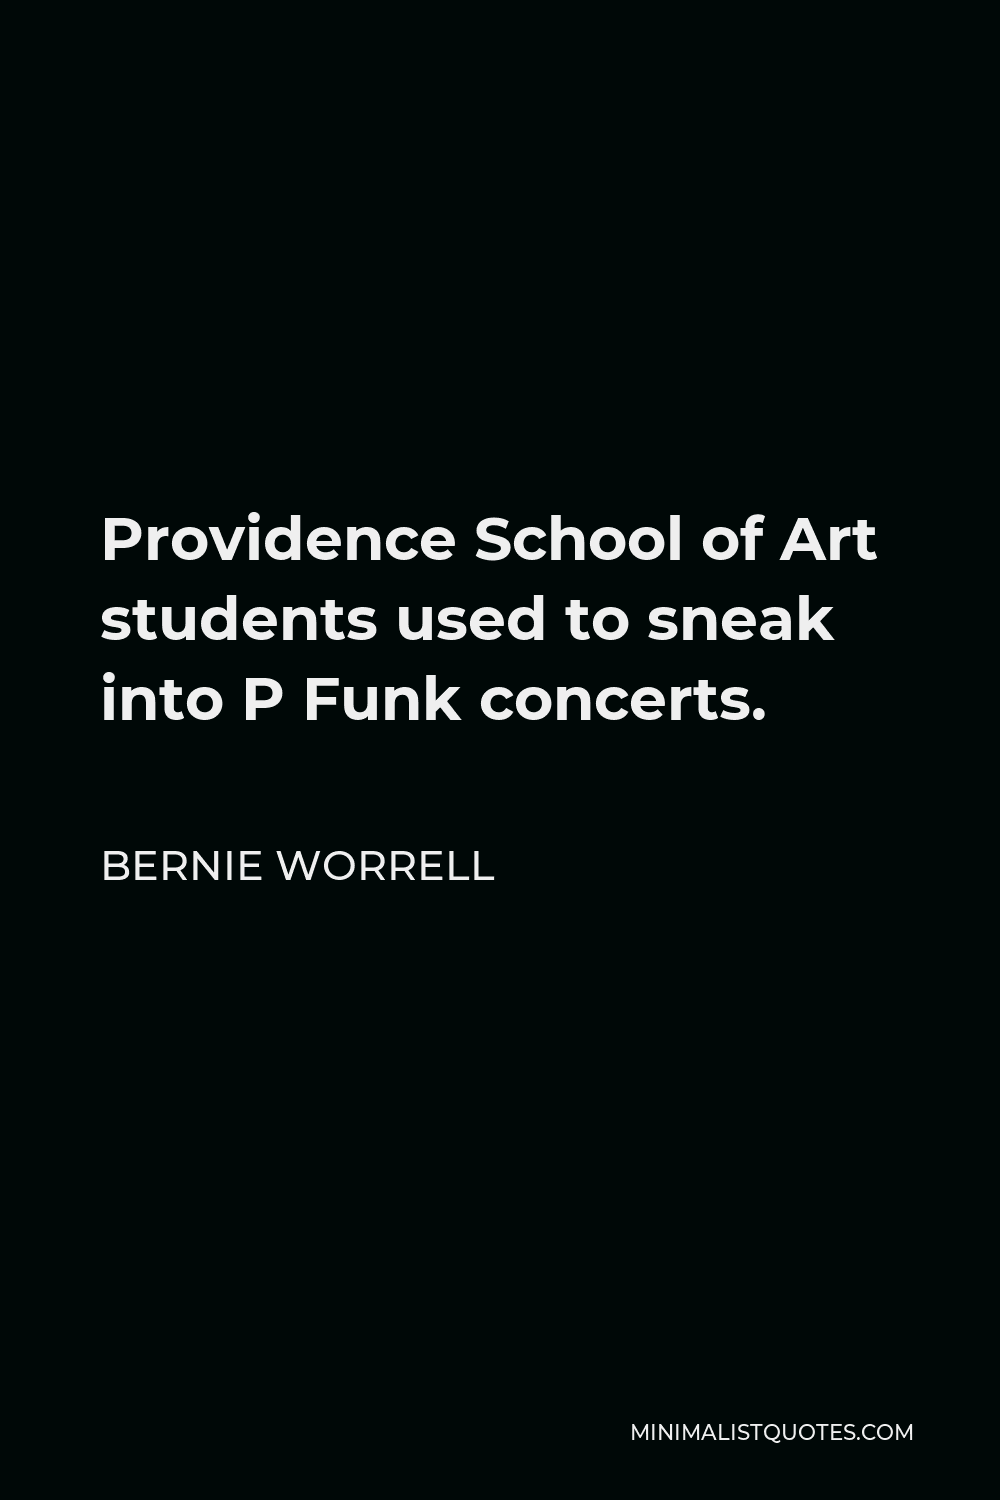 Bernie Worrell Quote - Providence School of Art students used to sneak into P Funk concerts.